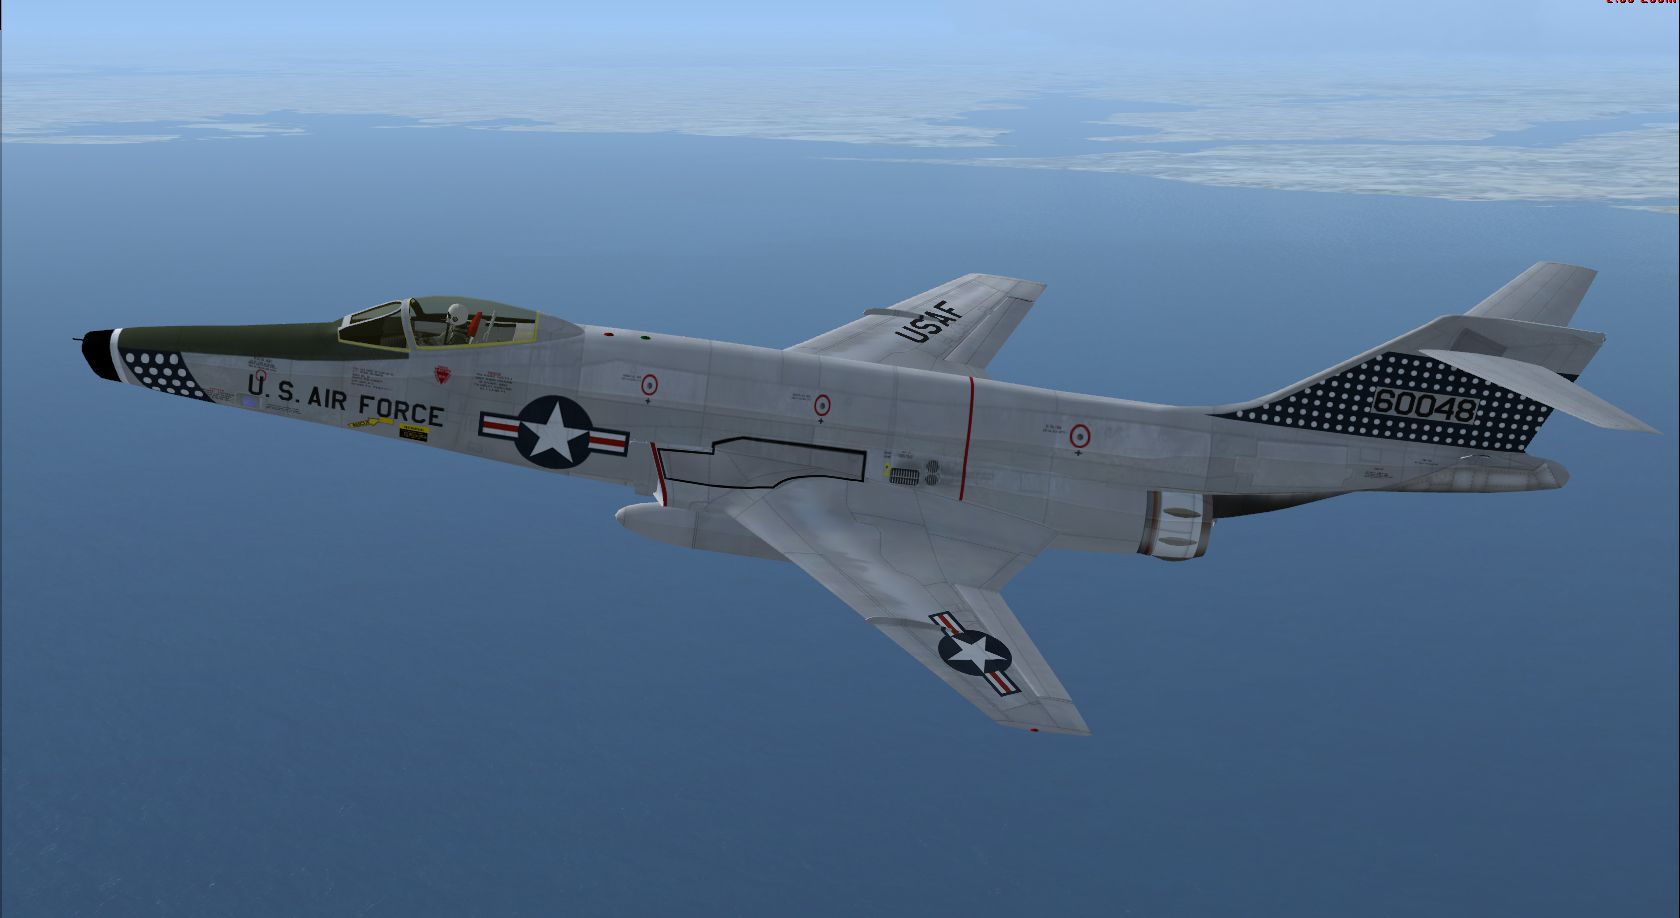 McDonnell RF-101C Voodoo Texture Sets for FSX